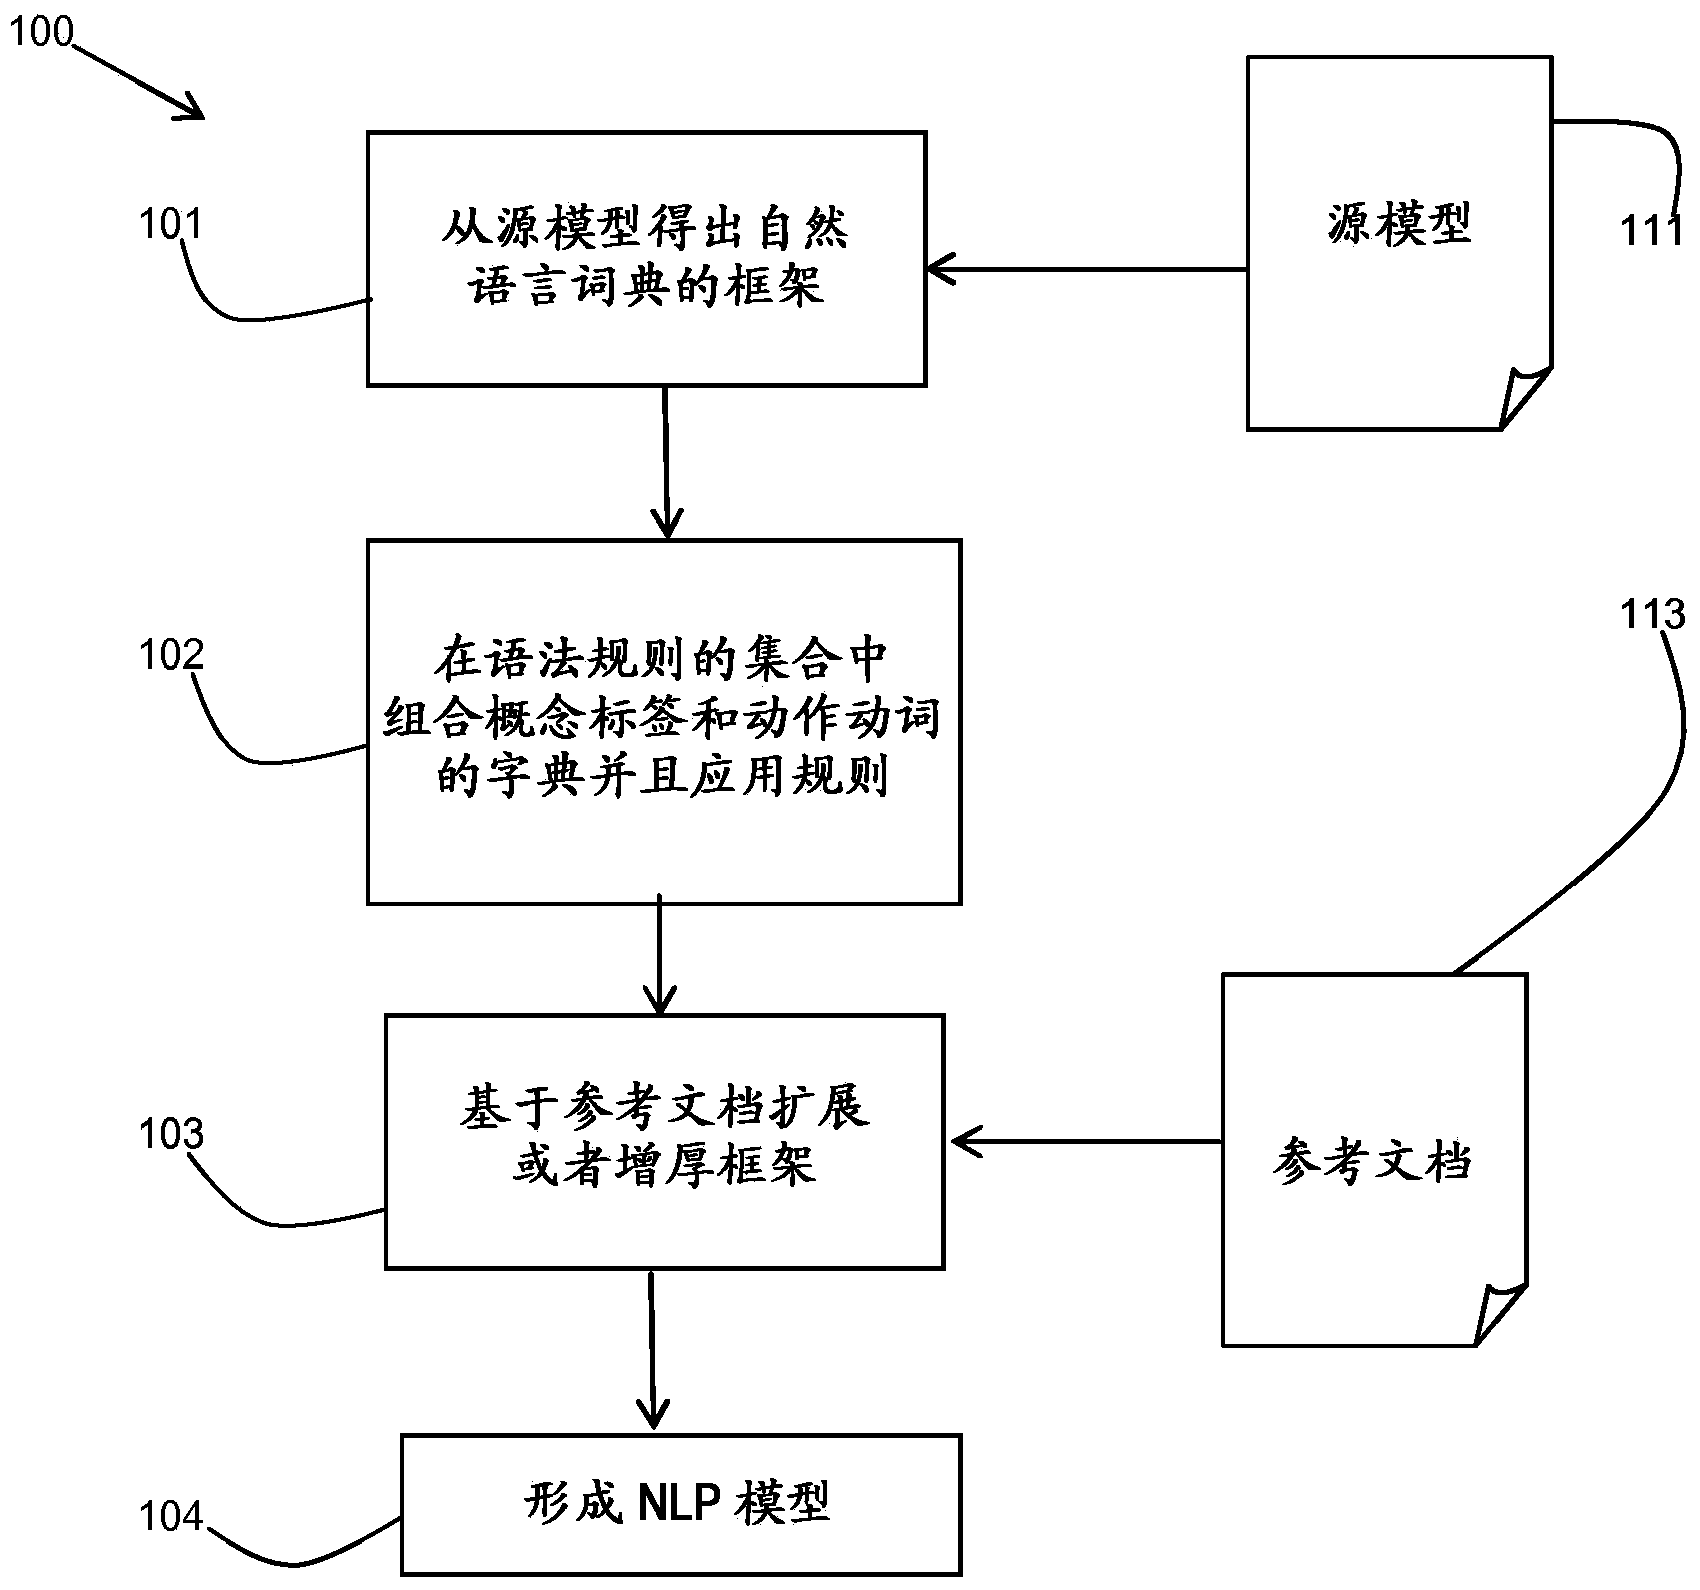 Generation of natural language processing model for information domain